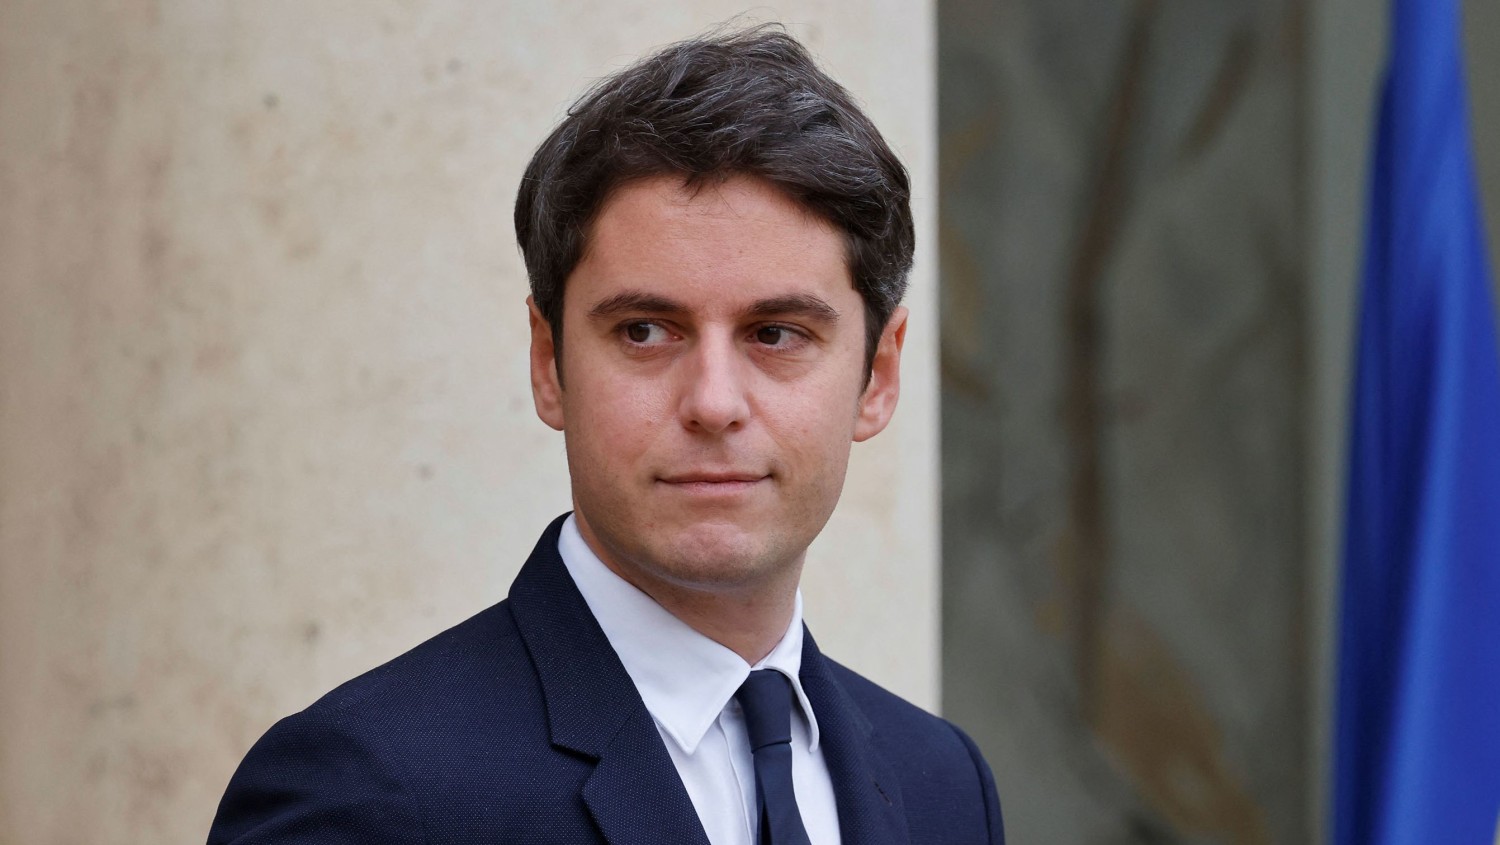 Gabriel Attal, 34, becomes France’s youngest prime minister in decades